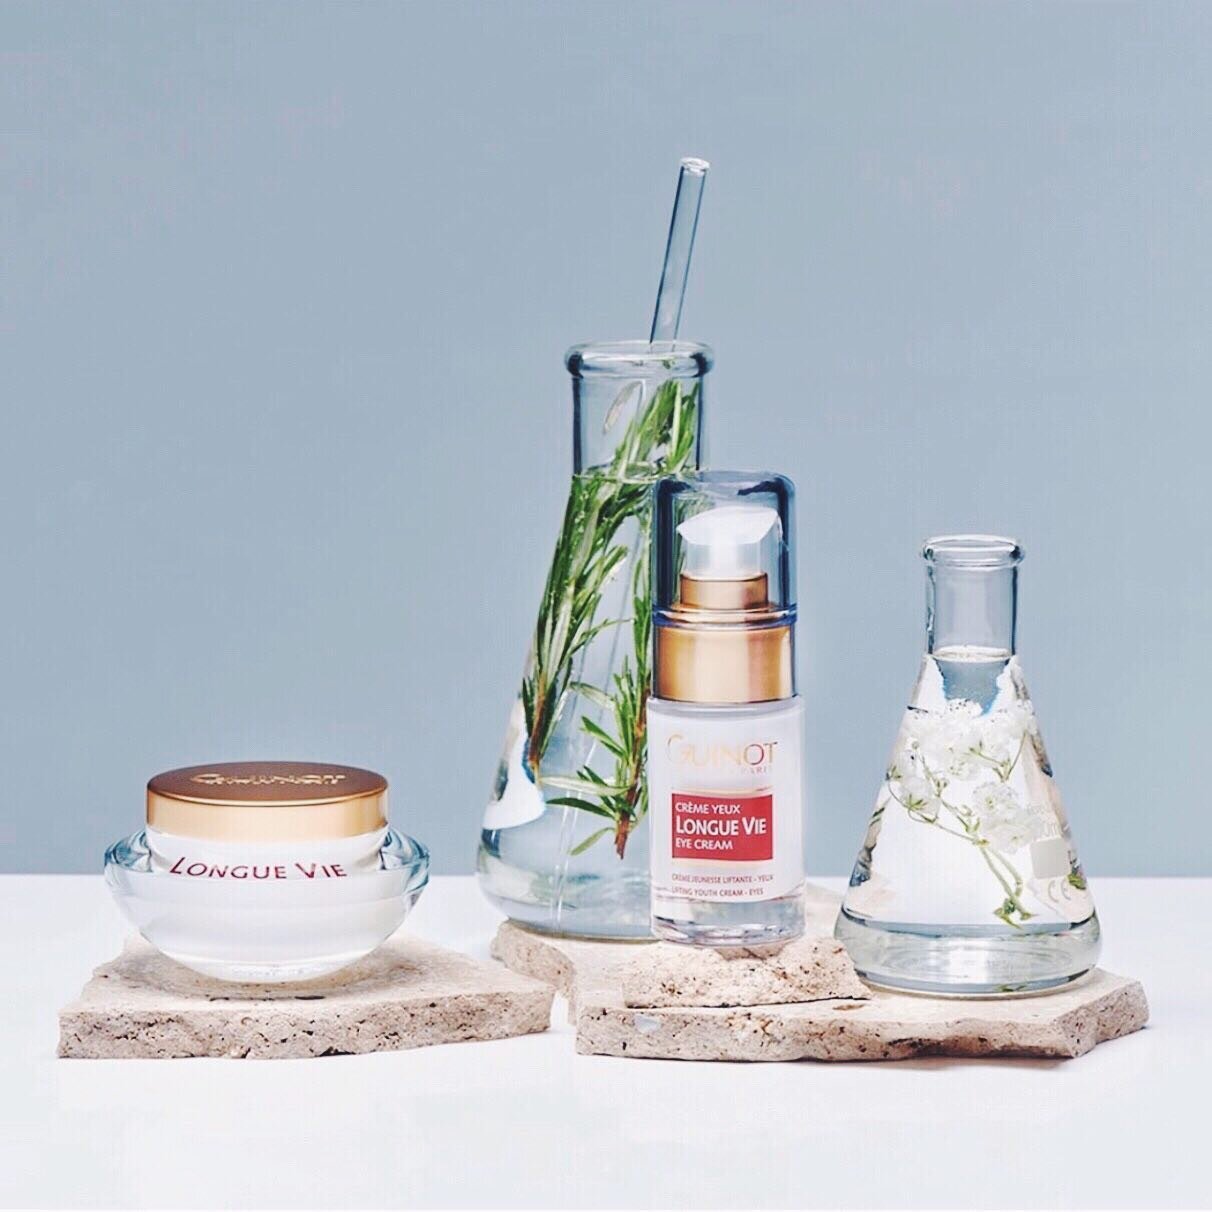 ✨56 Reasons Why we LOVE Guinot✨

The Guinot Longue Vie Range contains the Longue Vie Complex (Cellular Life Complex🌱), a formulation of 56 active ingredients designed to restructure, restore and renew the skin. 21 Amino Acids, 17 Vitamins and biolog